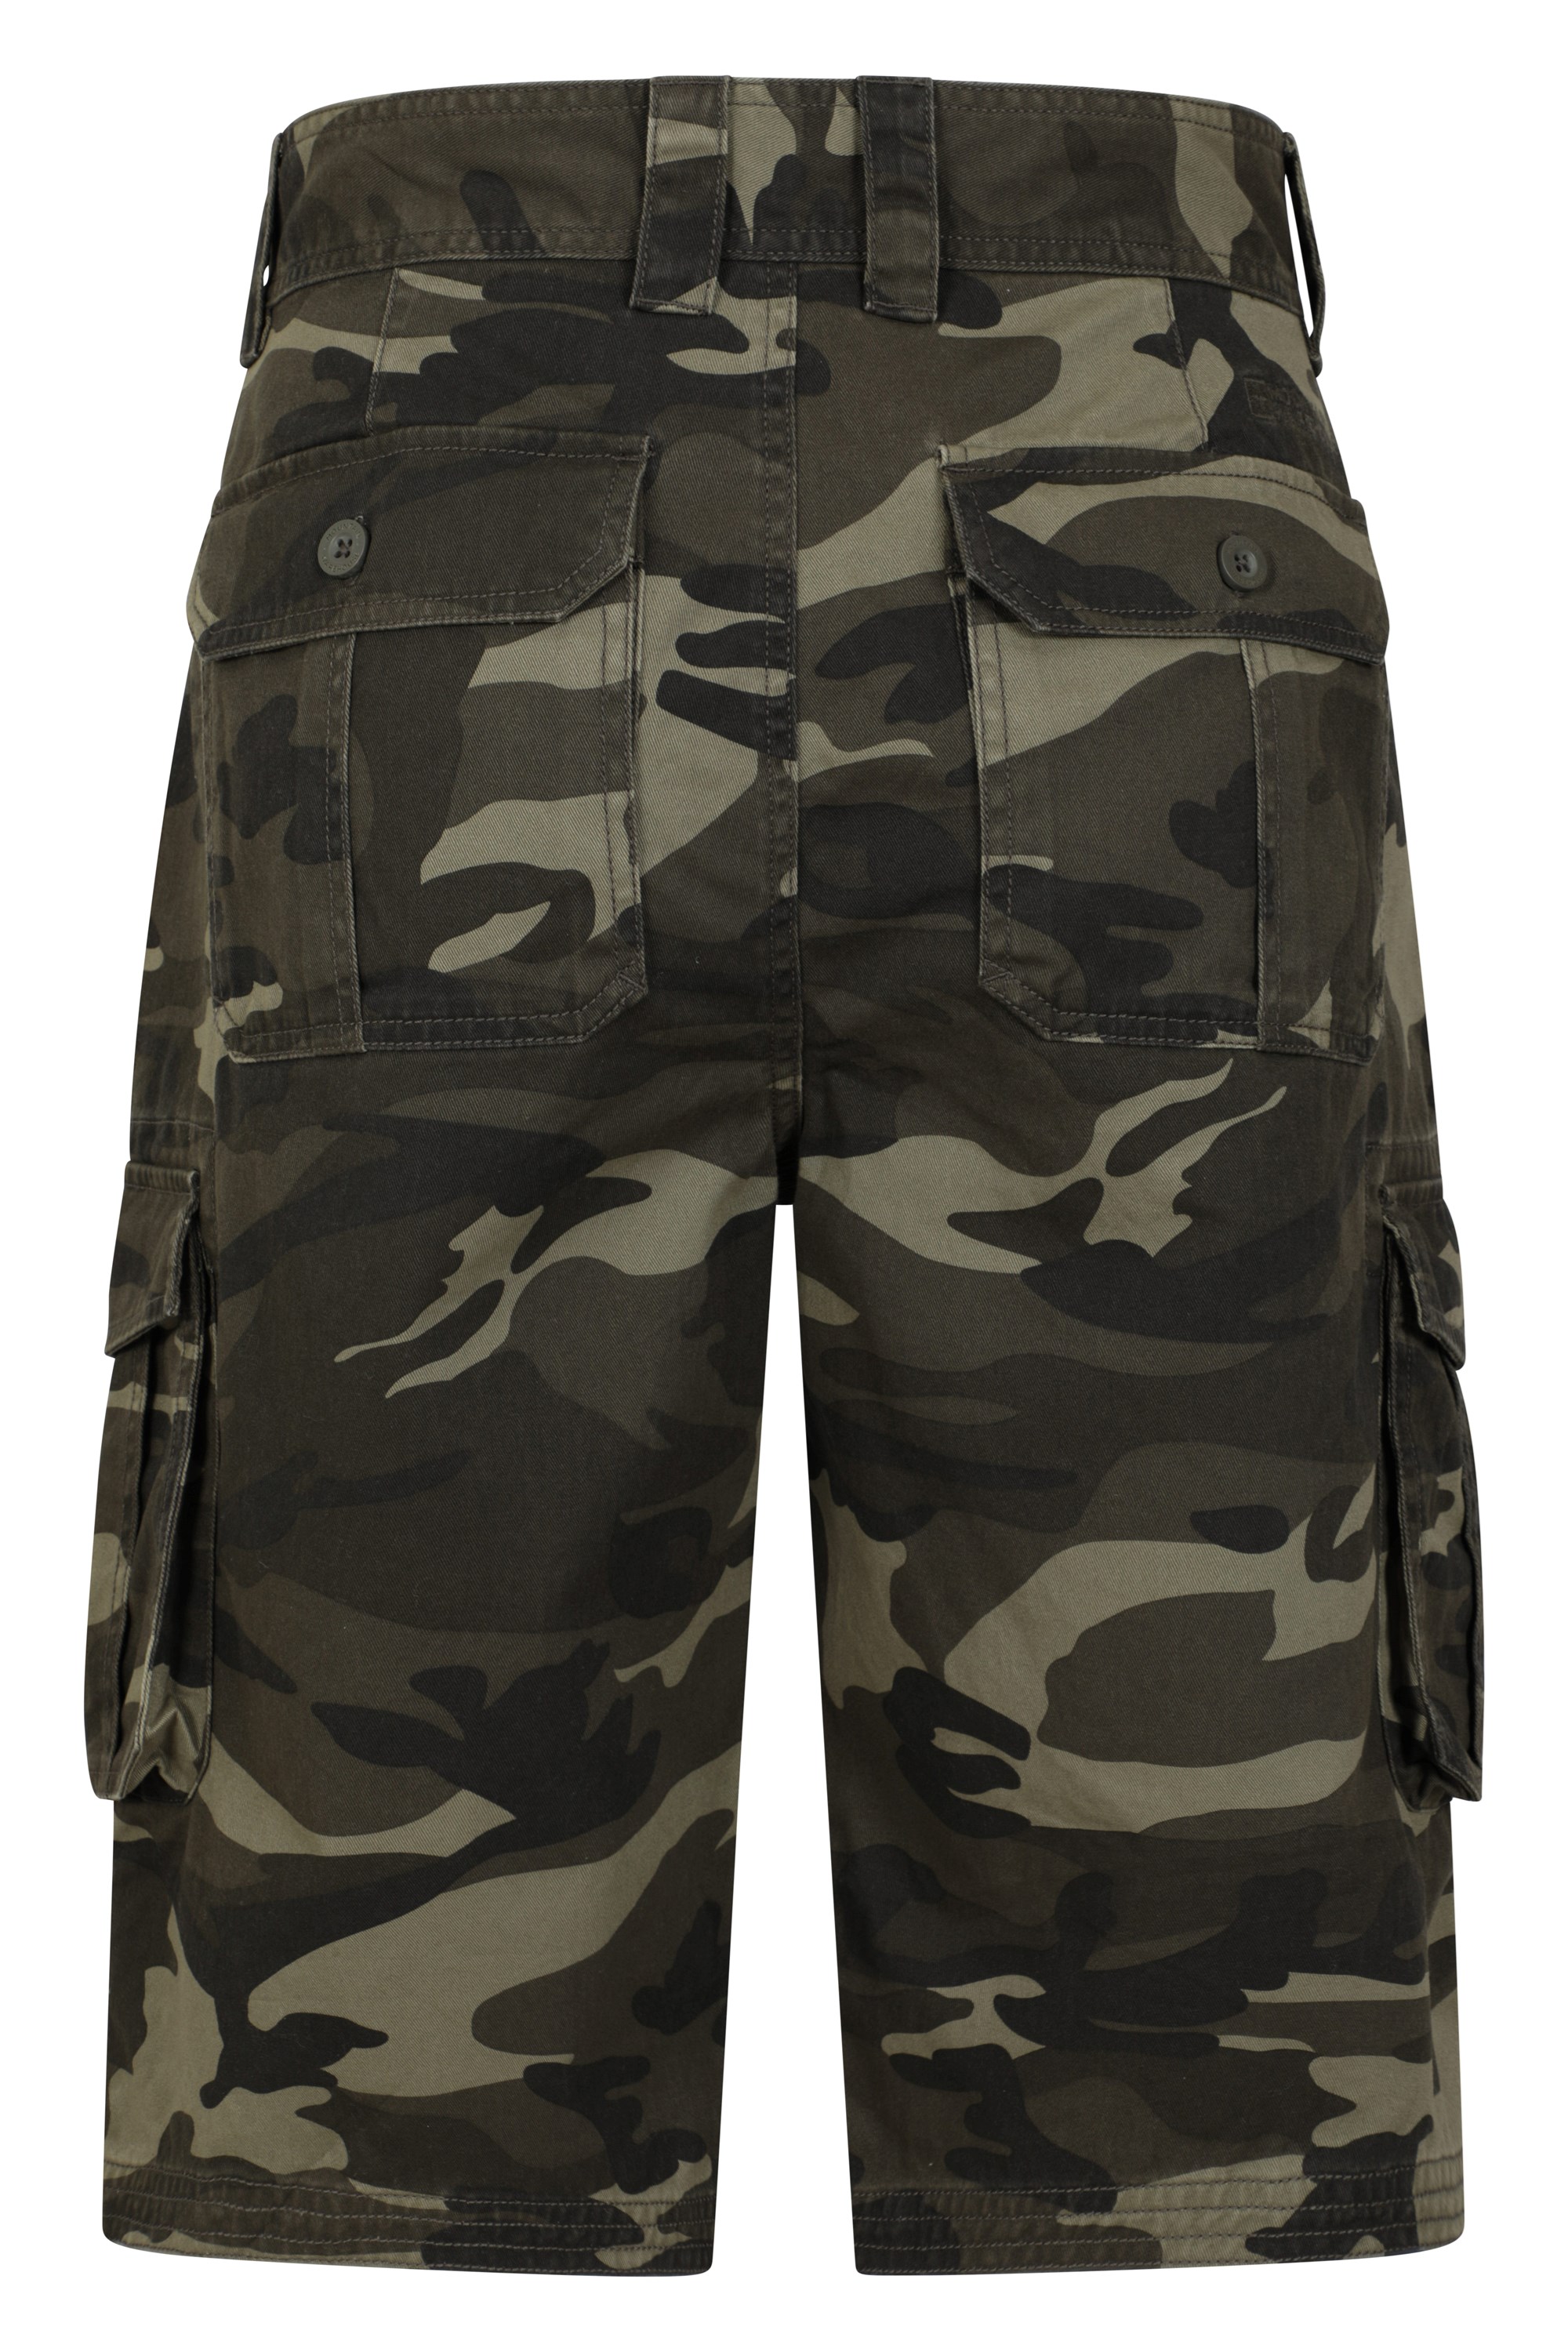 Clearance RYRJJ Men's Cargo Shorts Summer Relaxed Fit Camo Short Outdoor  Multi-Pocket Cotton Work Casual Shorts with No Belt(Black,6XL) 